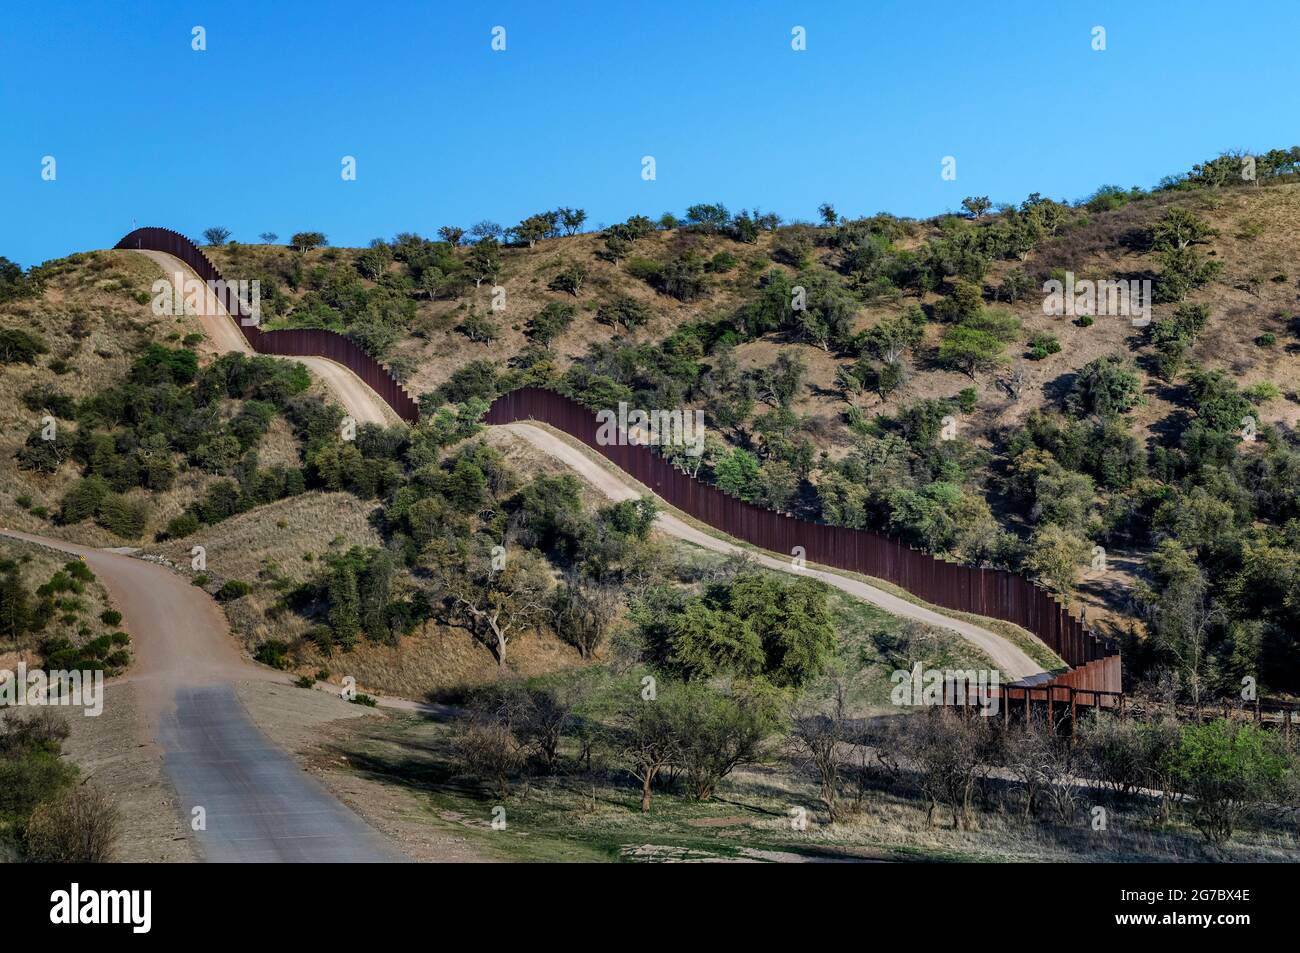 US border fence (pedestrian barrier) on the Mexico border, west of Nogales Arizona and Nogales Sonora Mexico, viewed from US Side, looking southeast; Stock Photo